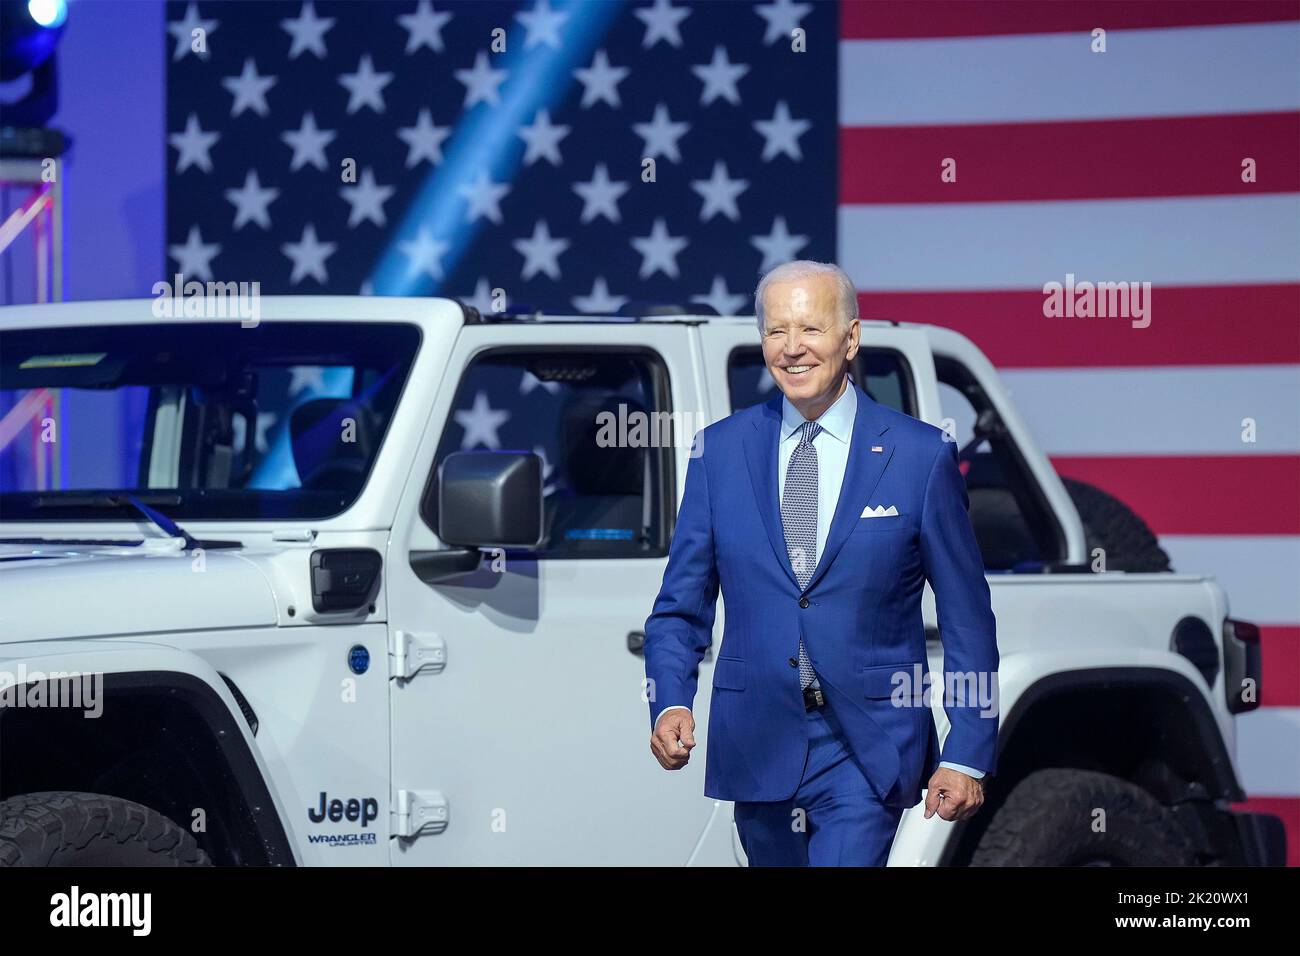 Detroit, United States of America. 14 September, 2022. U.S President Joe Biden, walks past a 2023 Jeep Wrangler during a visit to the 2022 North American International Auto Show at Huntington Place Convention Center, September 14, 2022 in Detroit, Michigan. Stock Photo